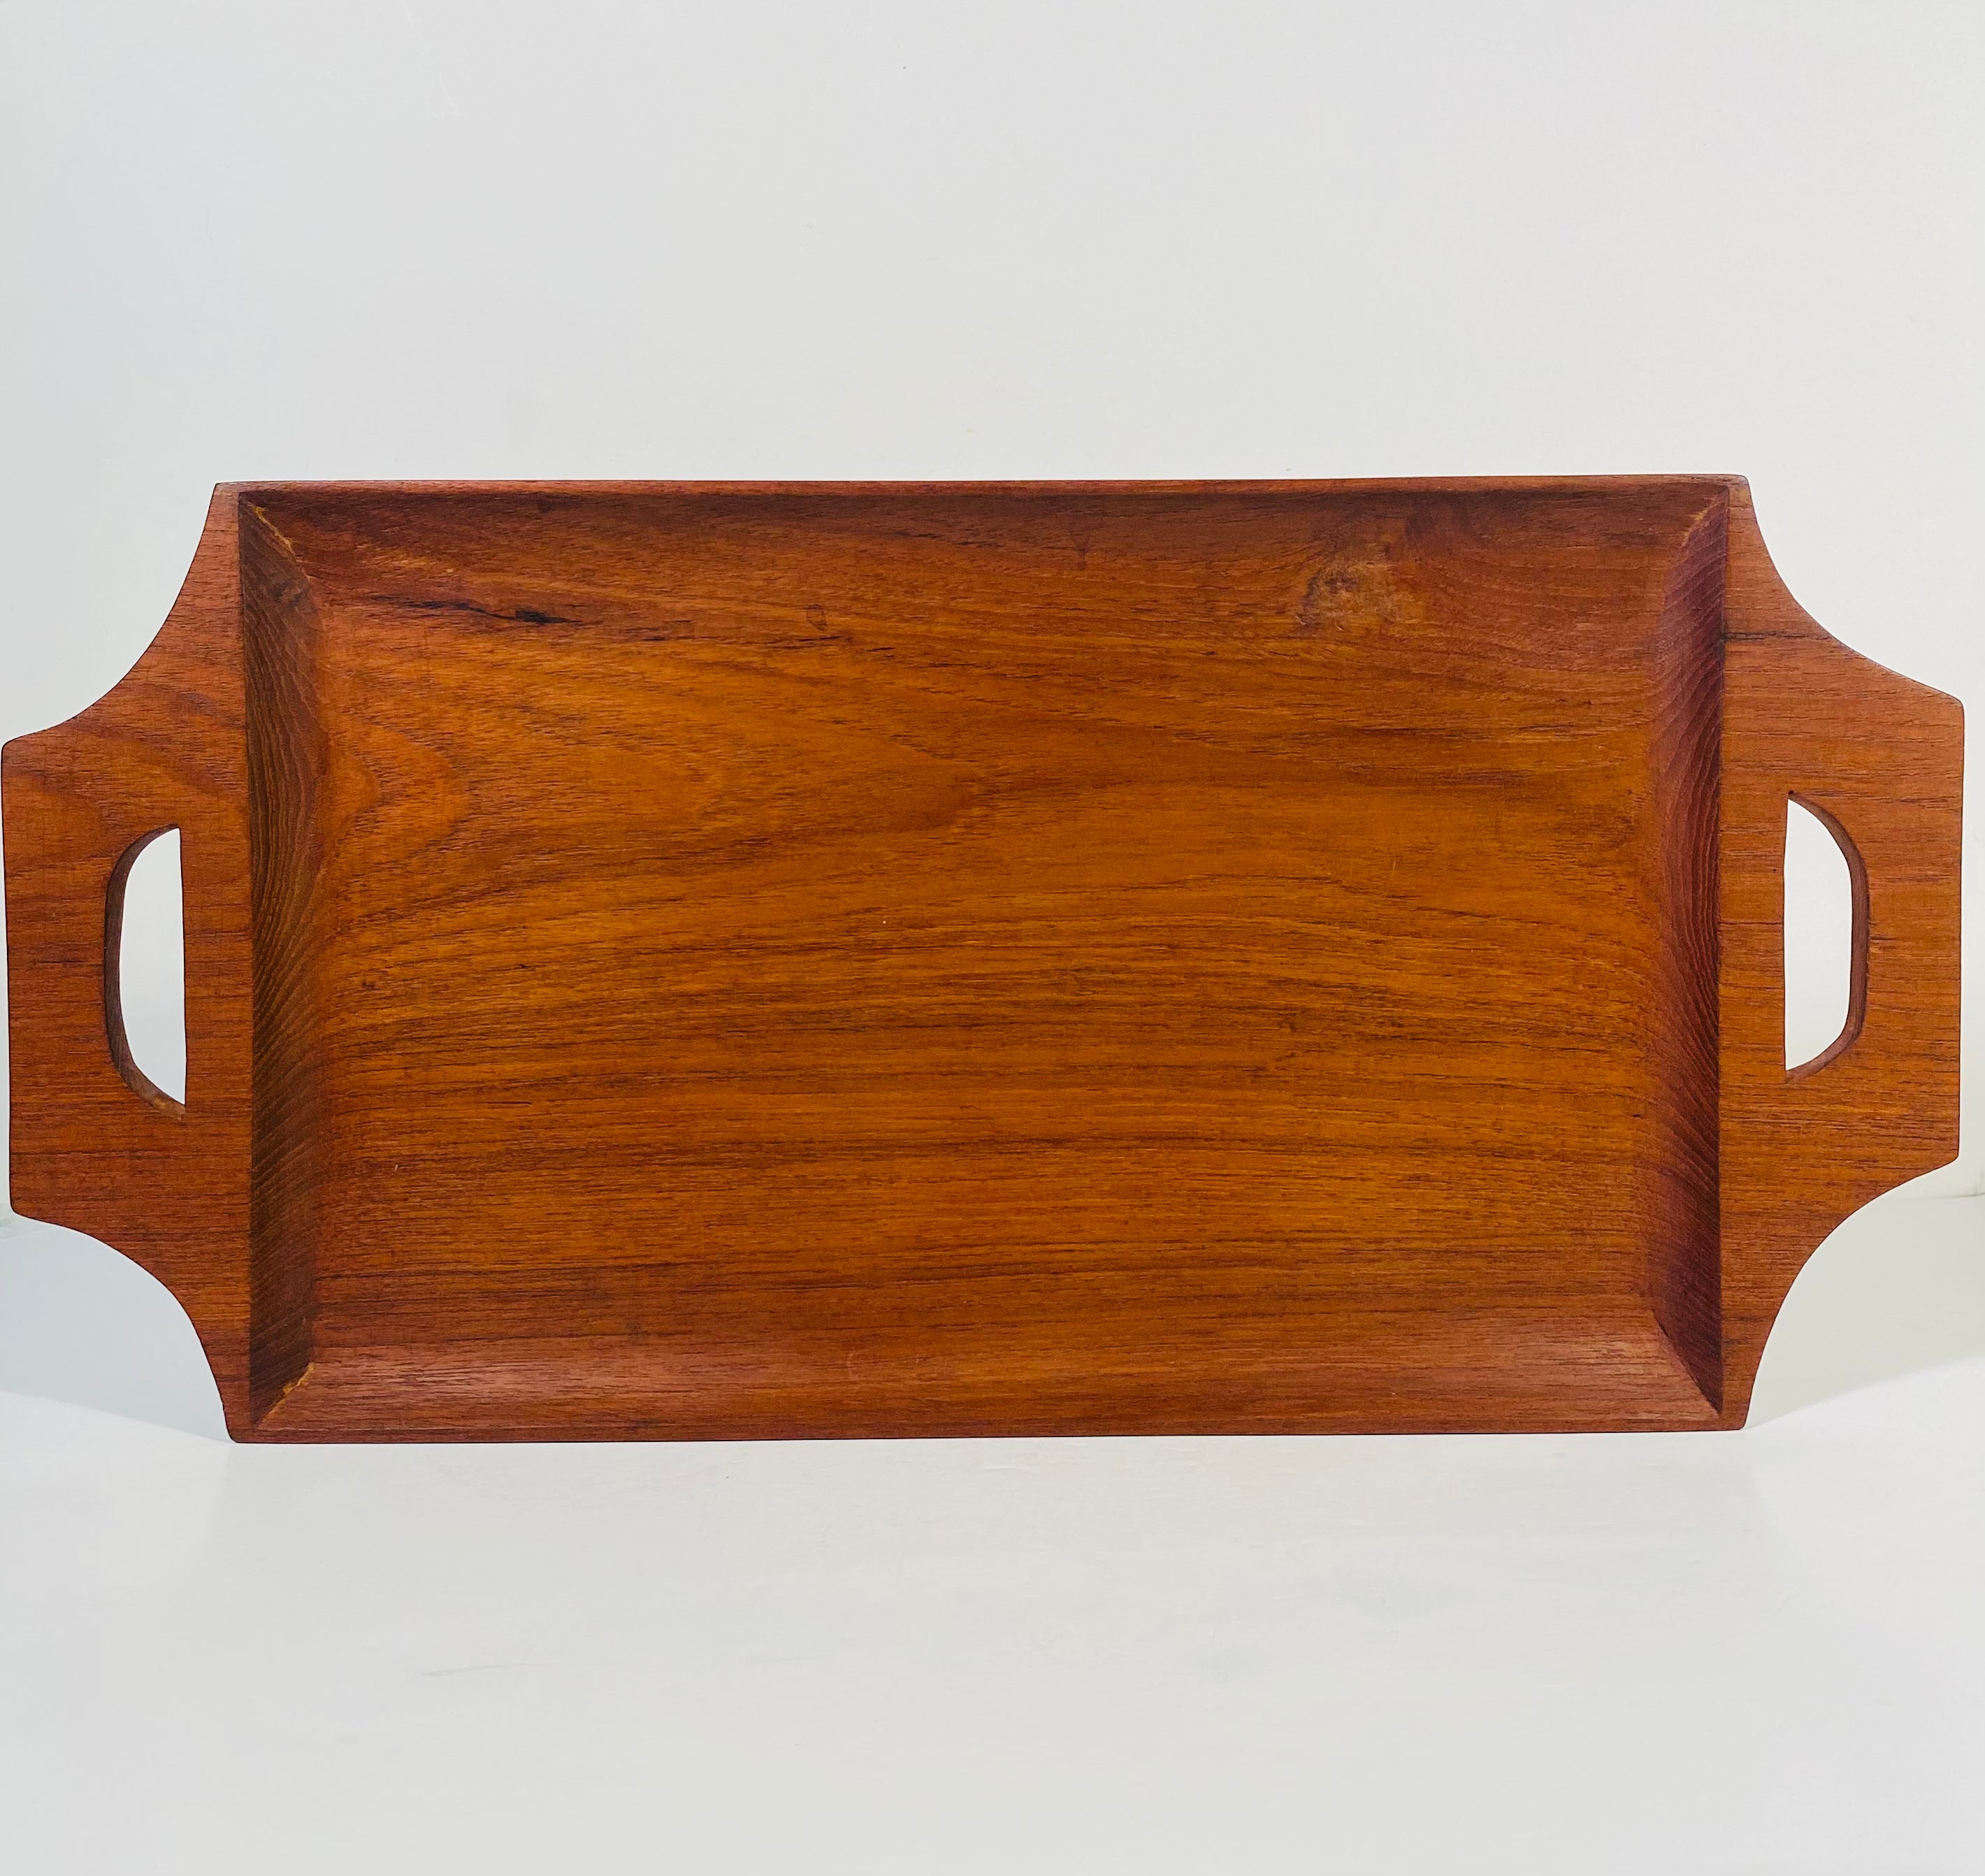 Vintage Wood Serving Tray With Handles